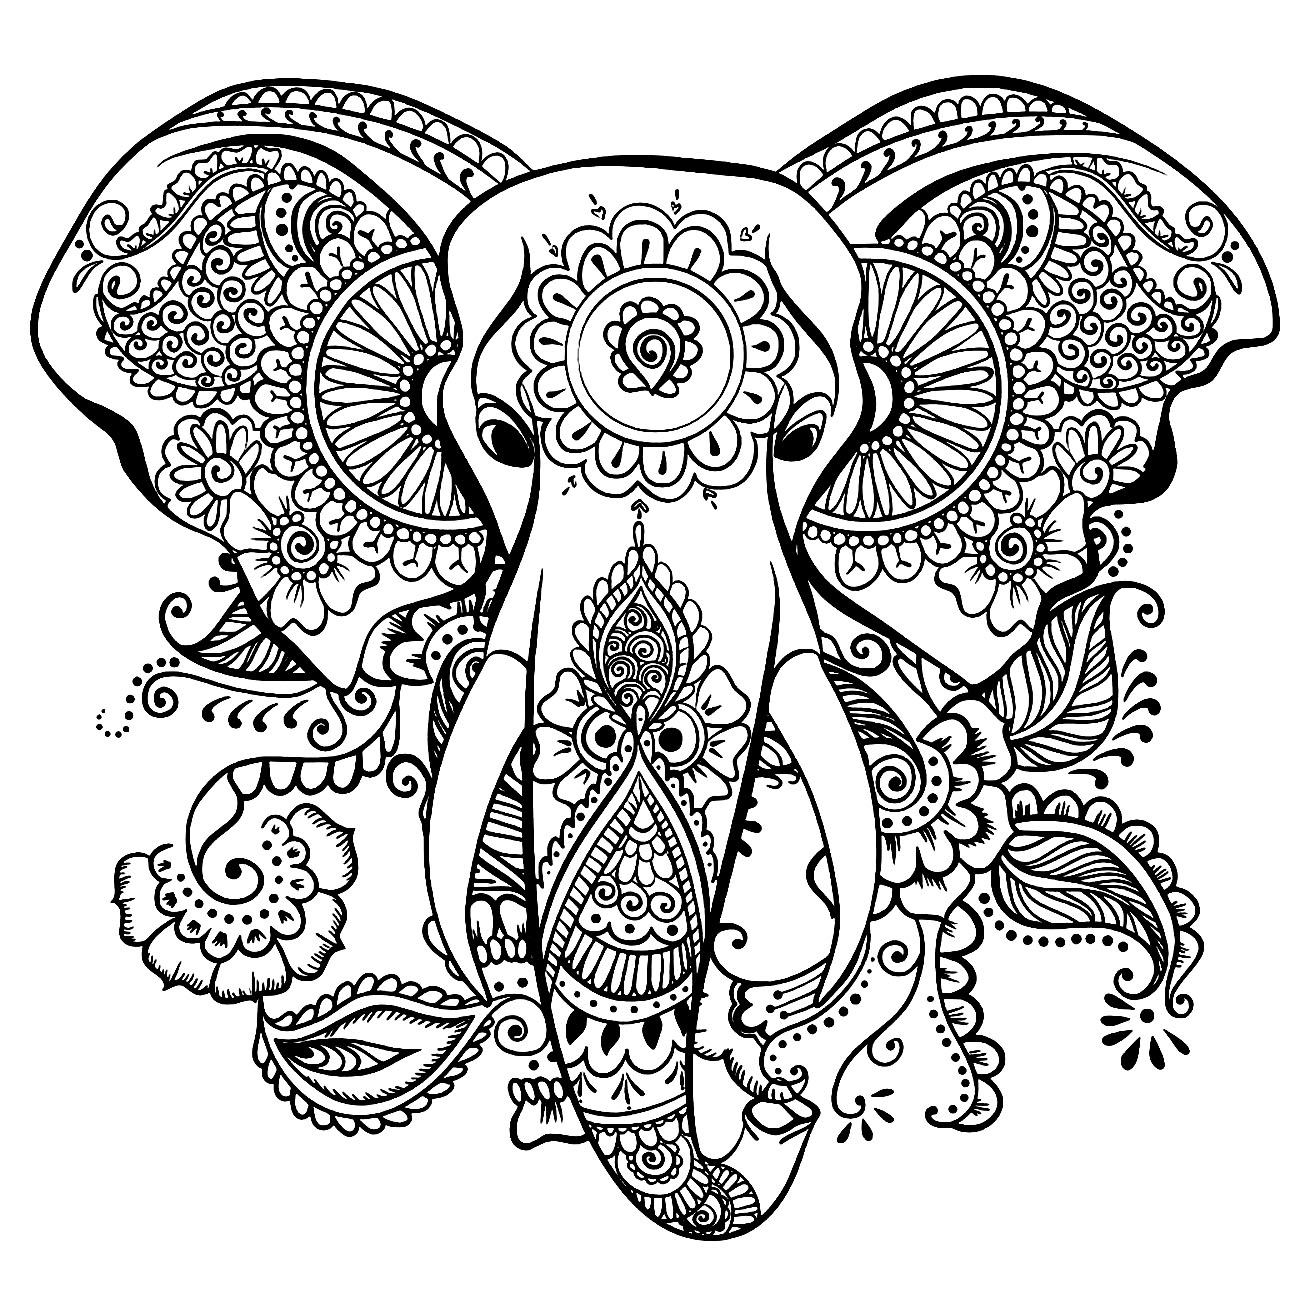 free-elephant-drawing-to-print-and-color-elephants-kids-coloring-pages